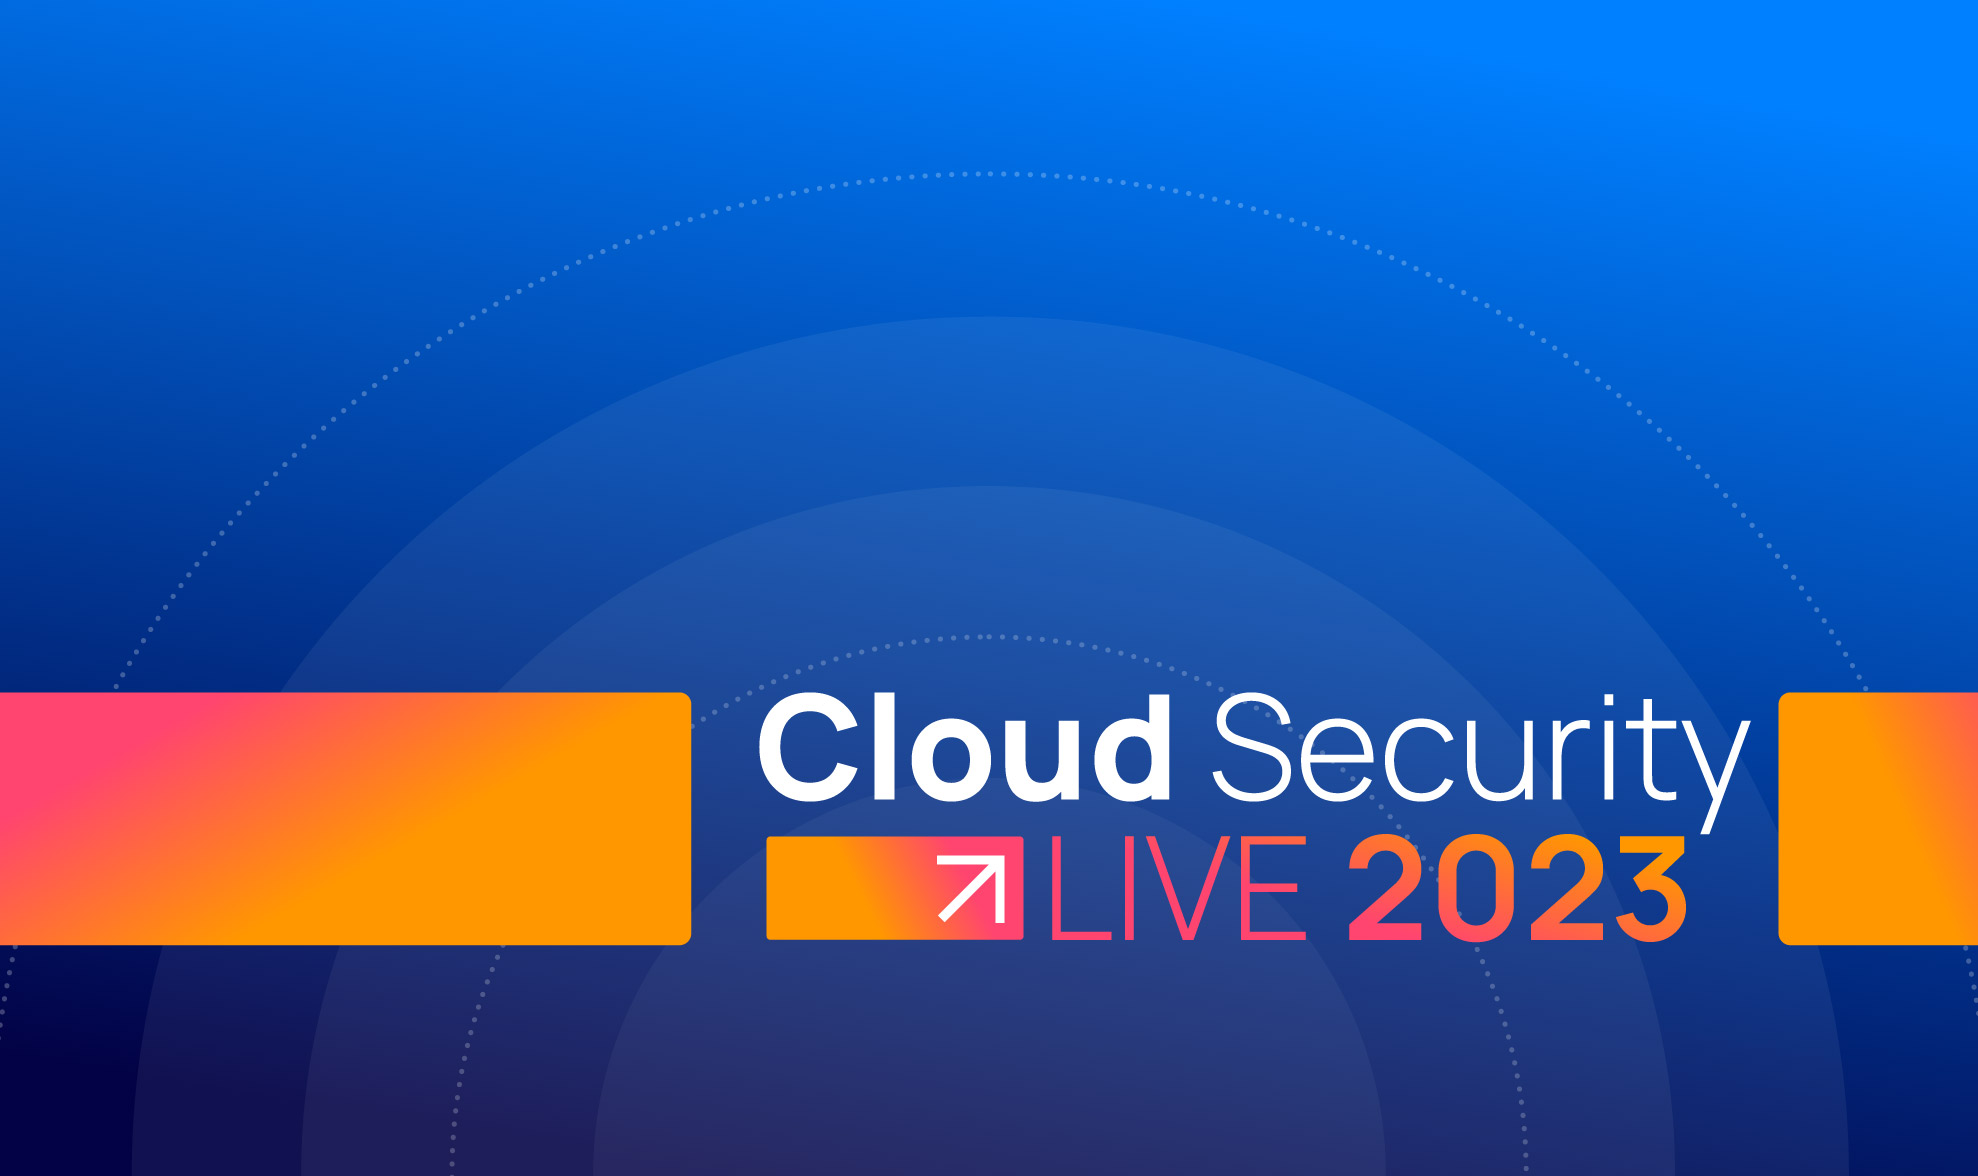 Join Orca Security at Cloud Security LIVE 2023